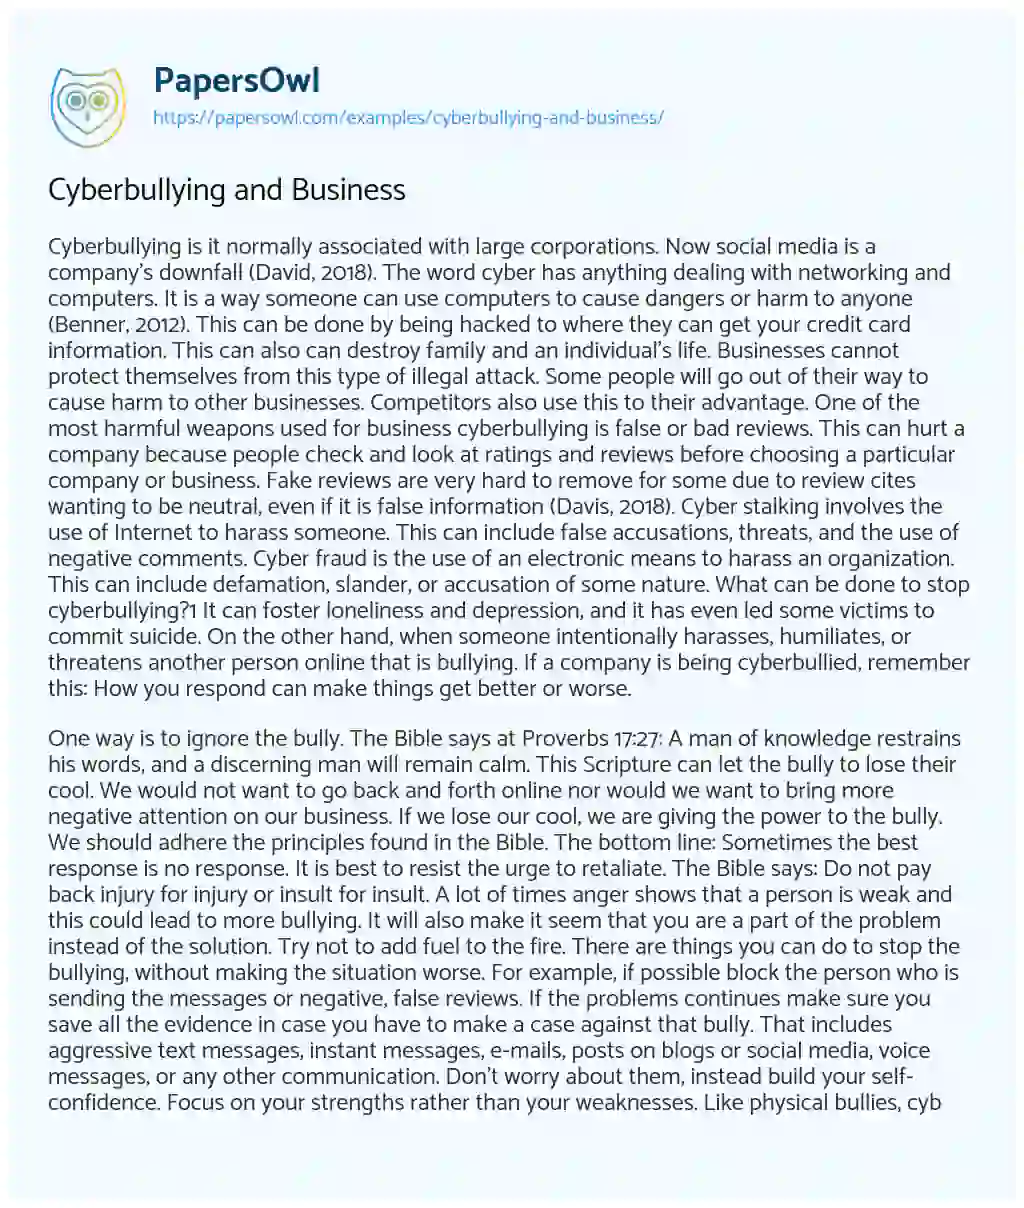 Essay on Cyberbullying and Business